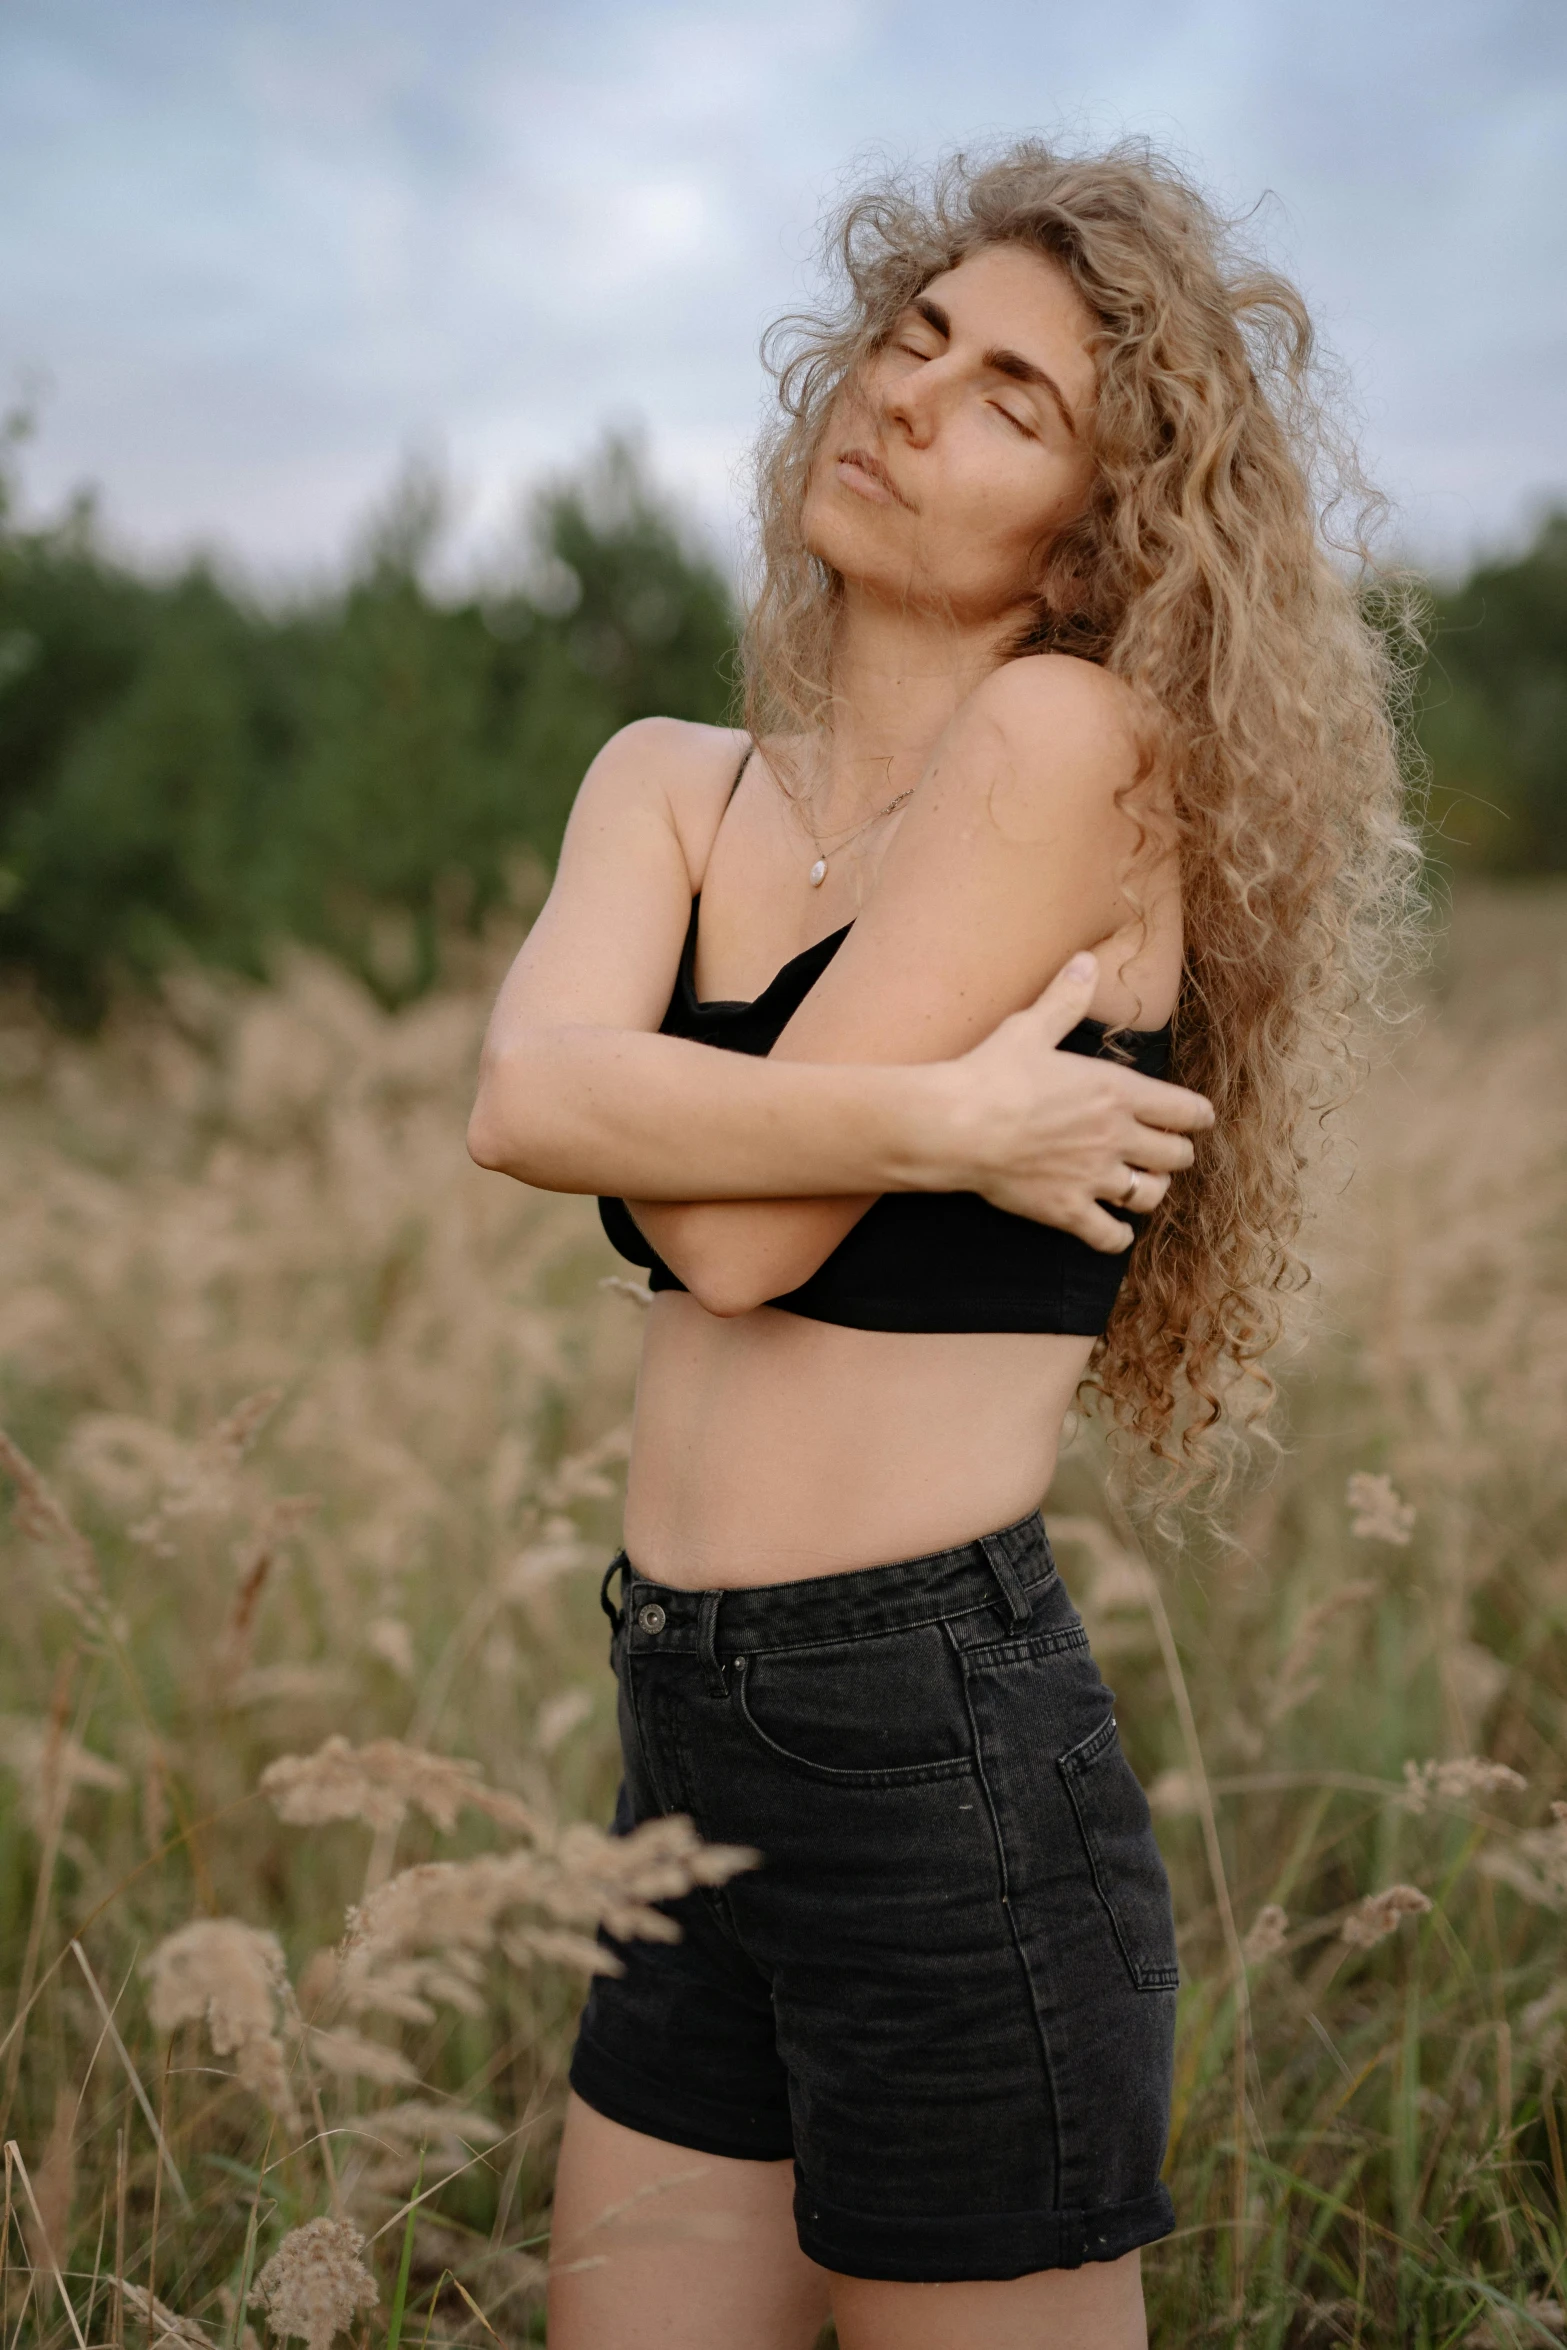 a woman standing in a field of tall grass, by Attila Meszlenyi, trending on pexels, renaissance, wearing bra, curly blond, wearing a black shirt, belly button showing